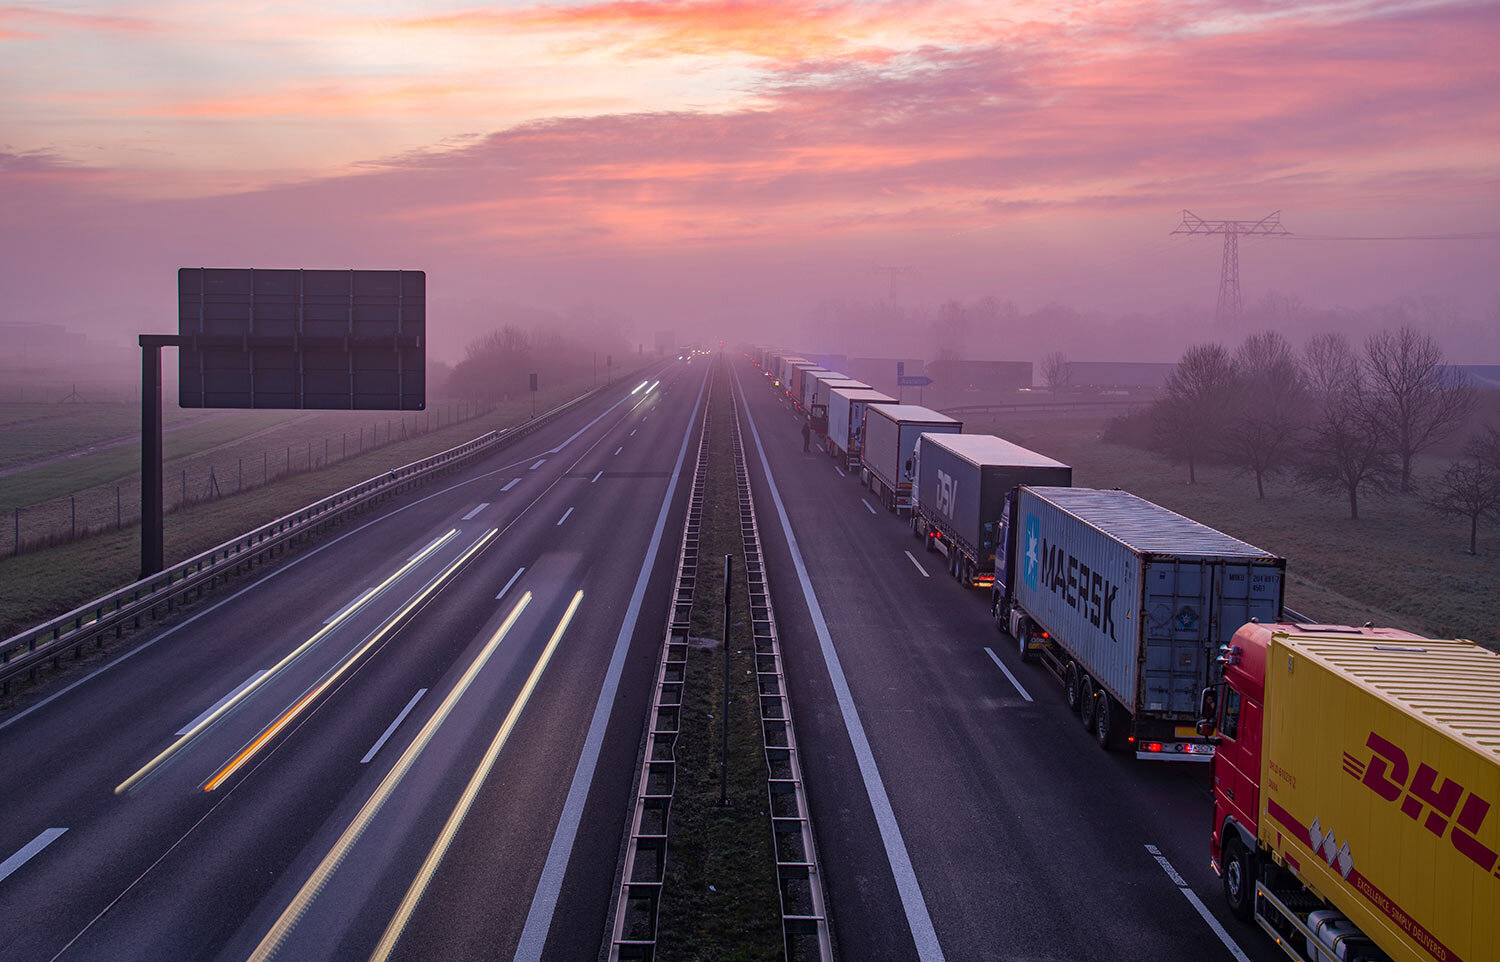  Trucks are jammed in the early morning on Autobahn 12 in front of the German-Polish border crossing near Frankfurt (Oder), Germany, March 18, 2020. (Patrick Pleul/dpa via AP) 